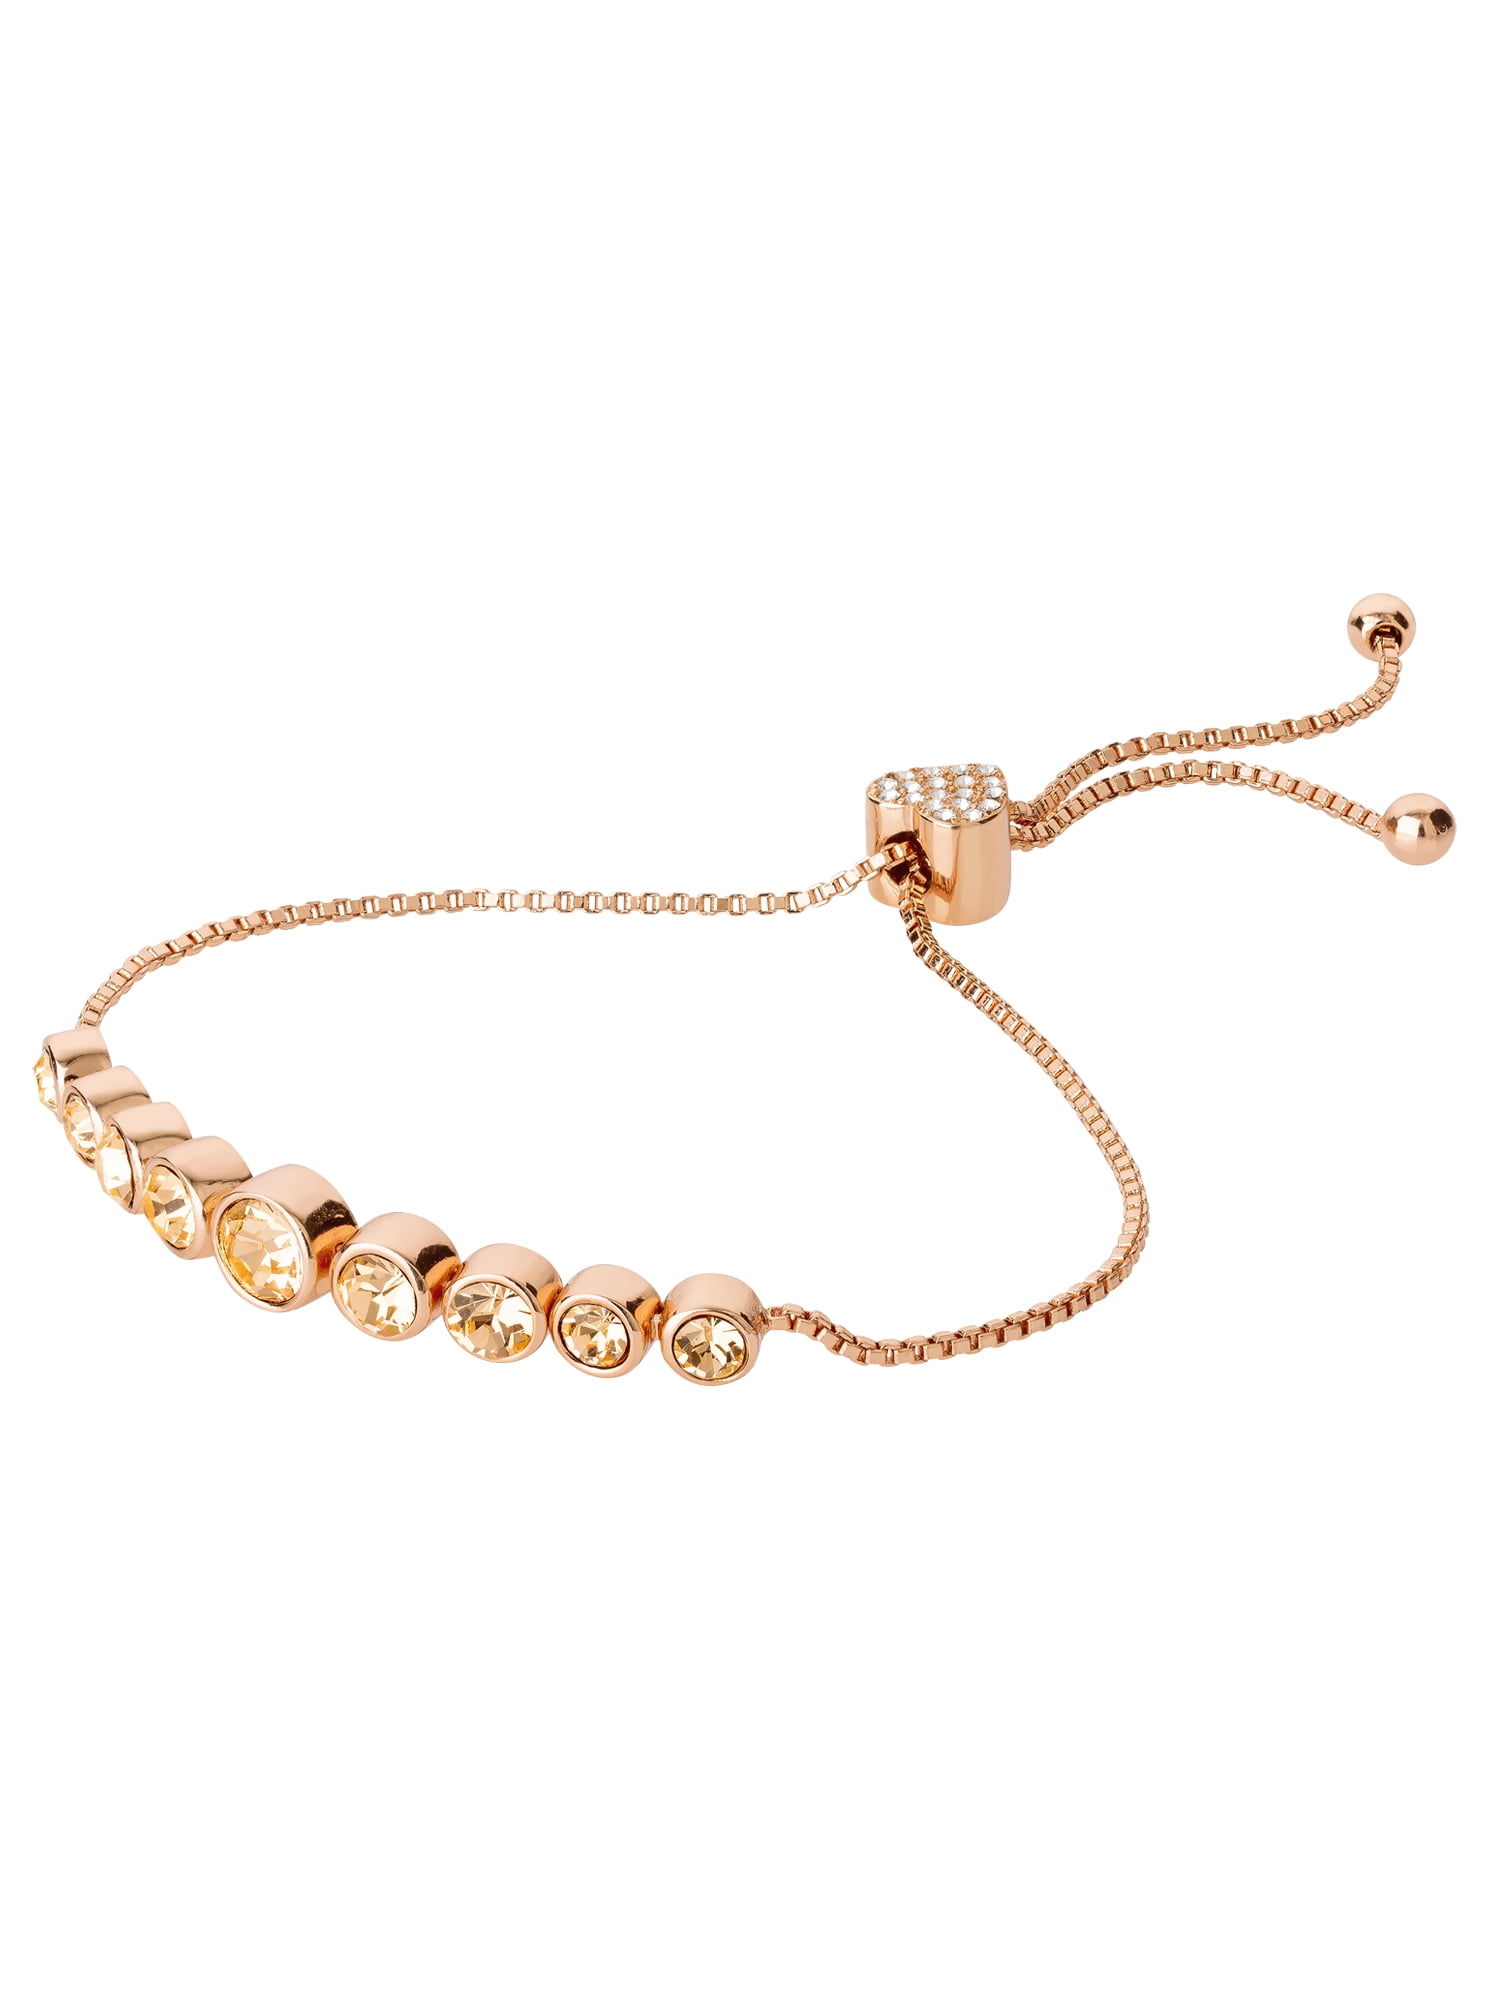 Believe by Brilliance - 14KT GOLD FLASH PLATED PEACH CRYSTAL BOLO ...